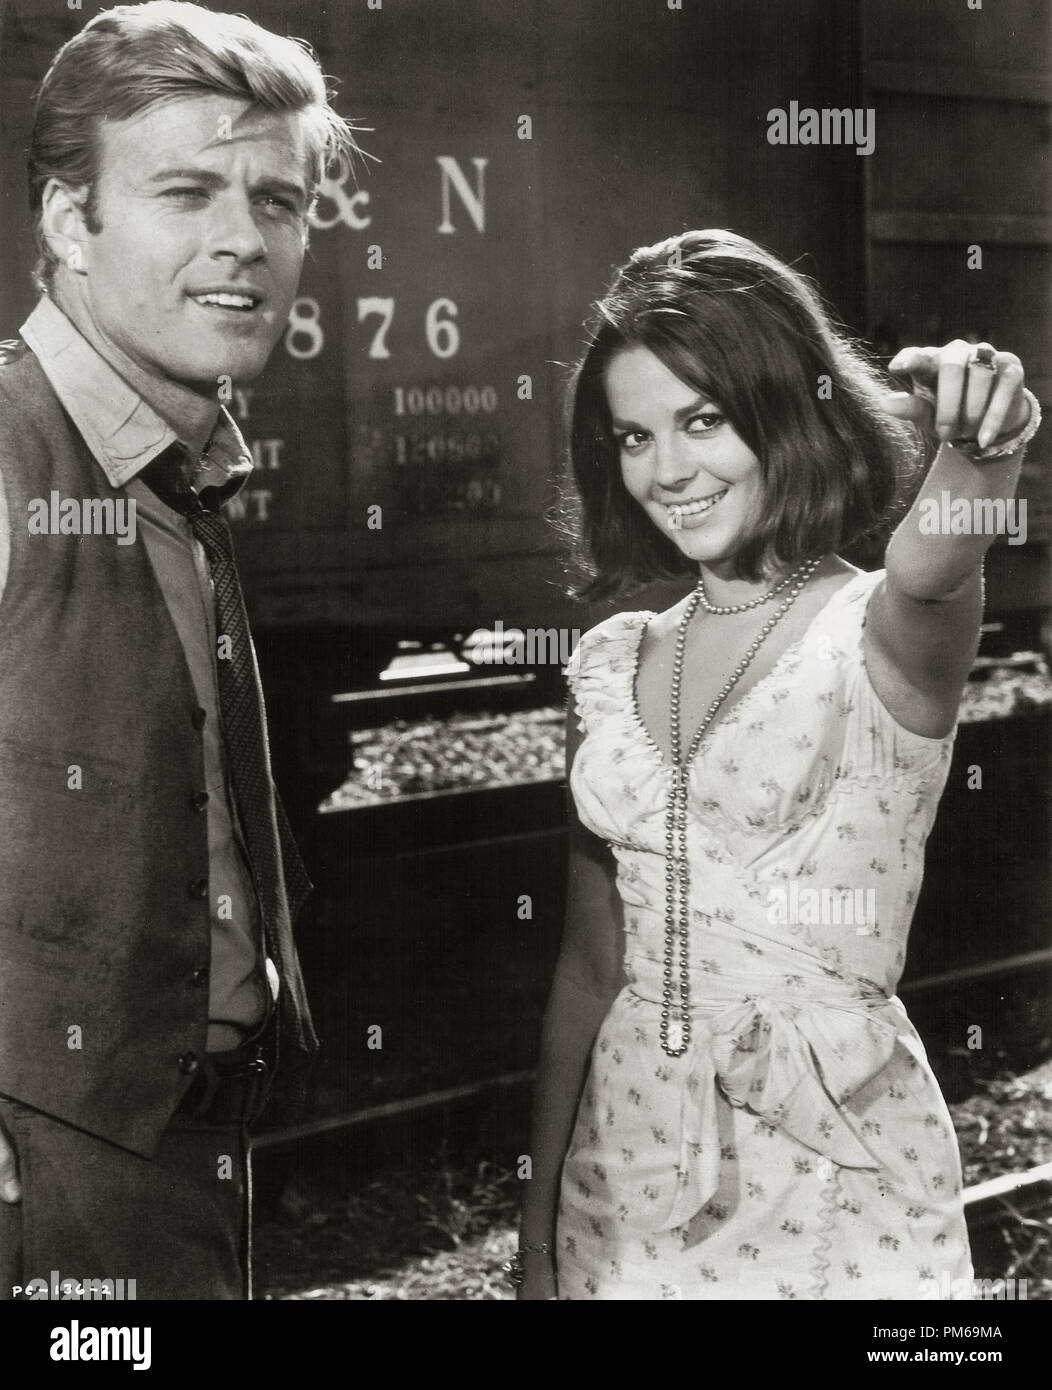 Robert Redford and Natalie Wood, "This Property is Condemned" 1966  Paramount File Reference # 31316 348THA Stock Photo - Alamy